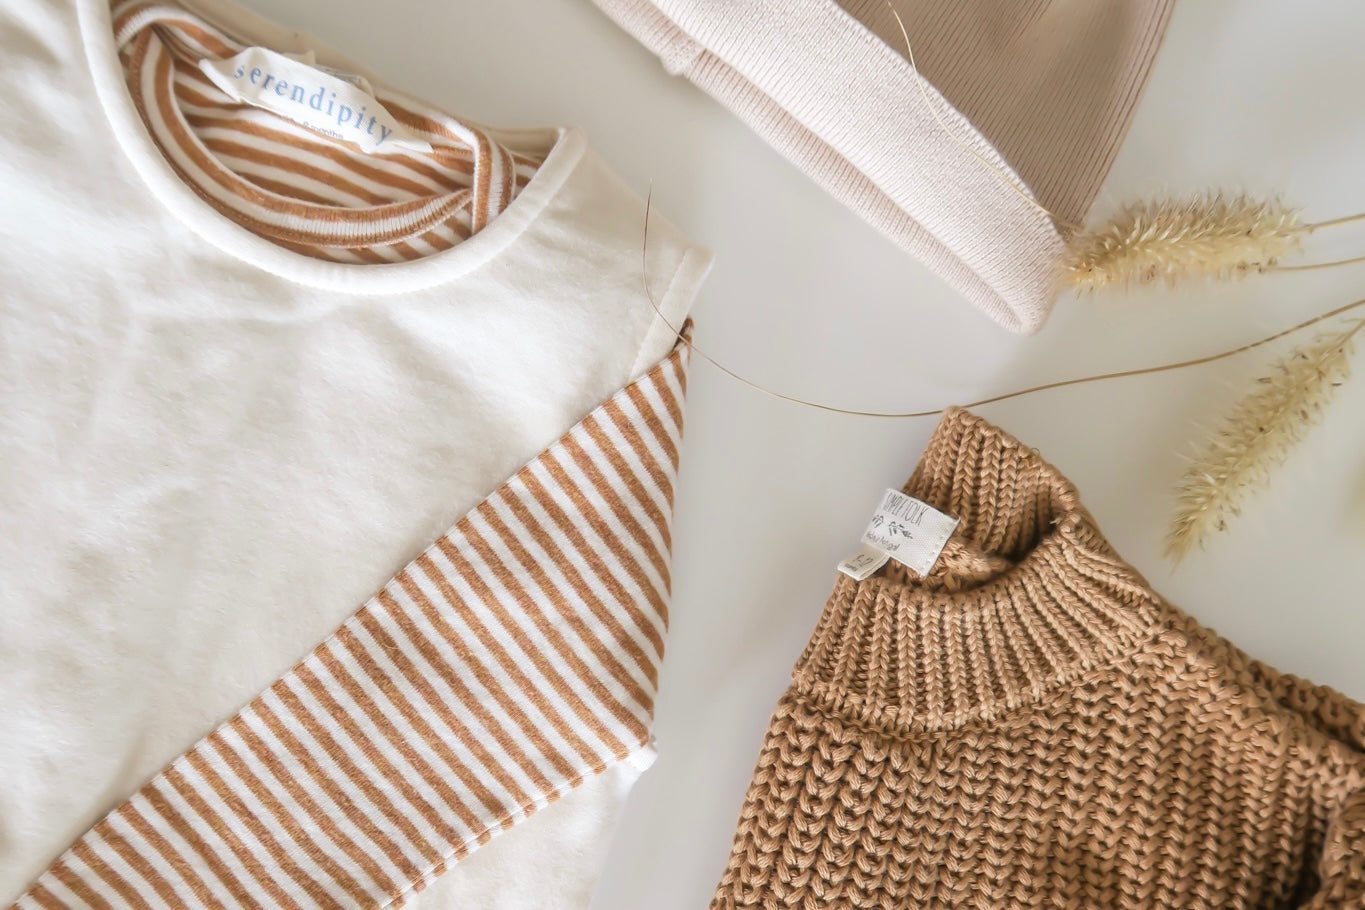 Photography from above of kid clothes from OiOiOi on a white background : on the left side a white kid hoodie from OiOiOi with brown  and white striped sleeves and on the right side a brown knitted folded kid sweater from OiOiOi and on the top a white and off-white baby hat and on the right side 2 stalks of wheat    